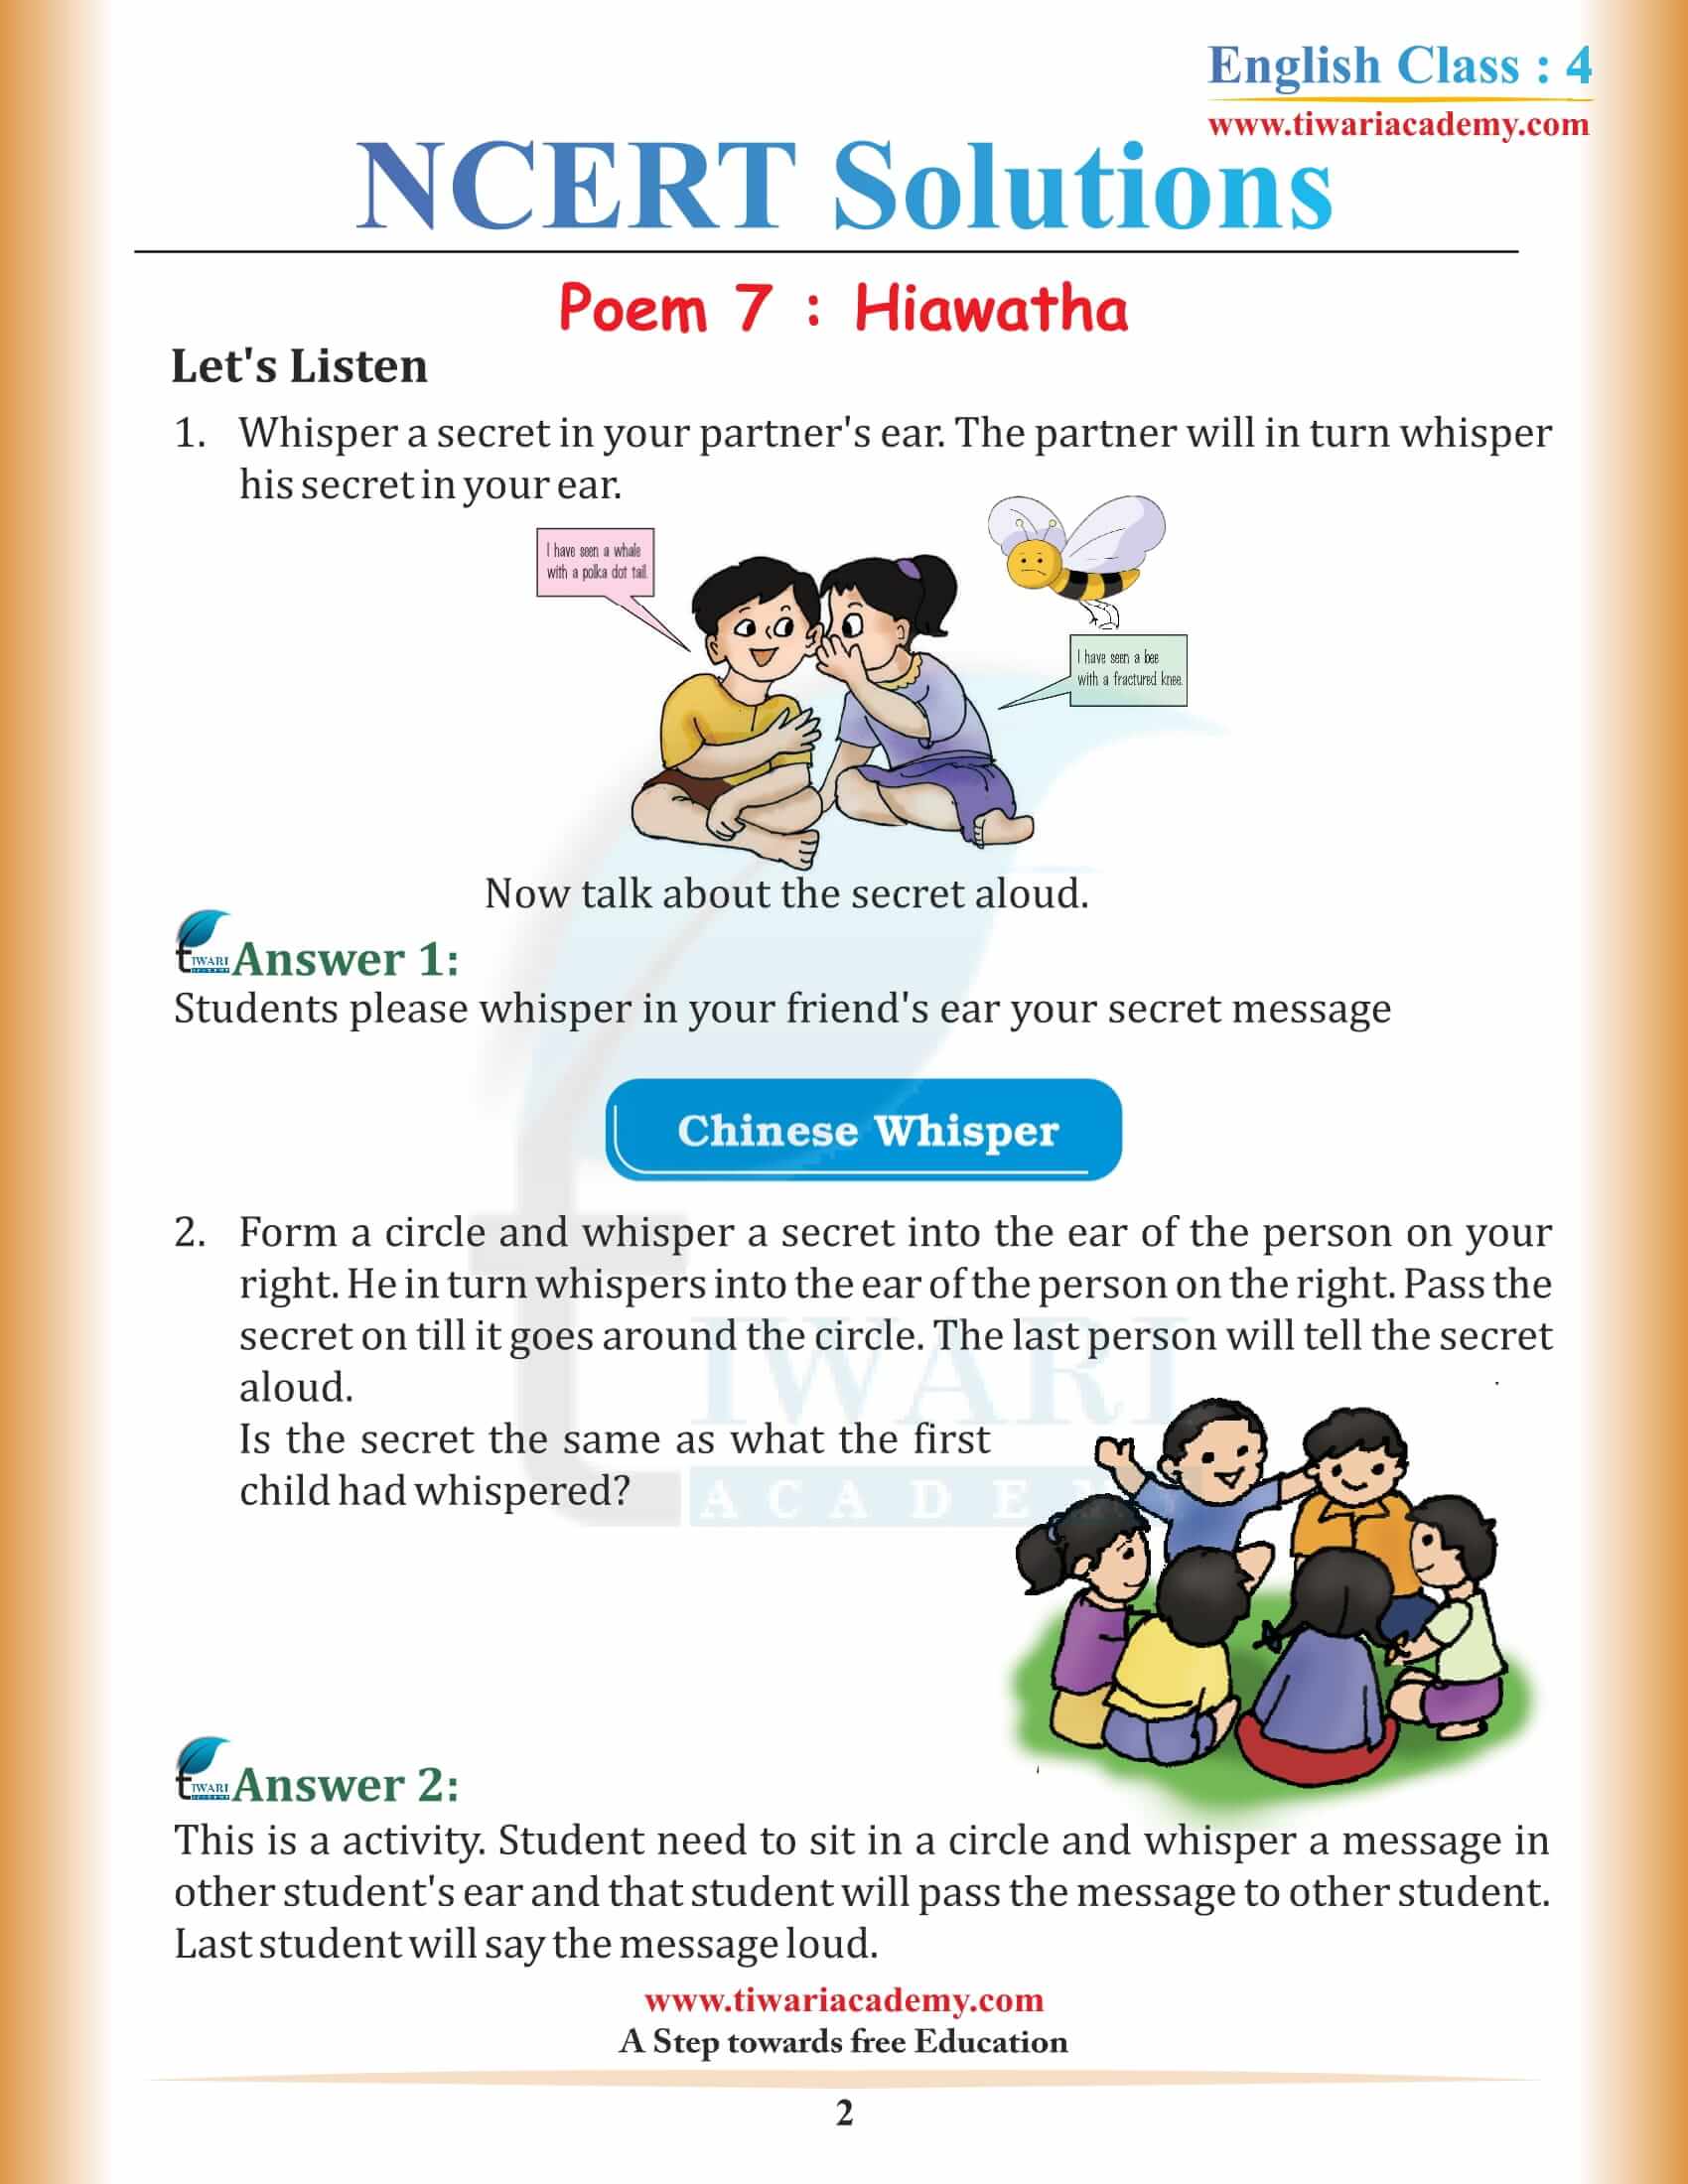 NCERT Solutions for Class 4 English Unit 7 Chapter 1